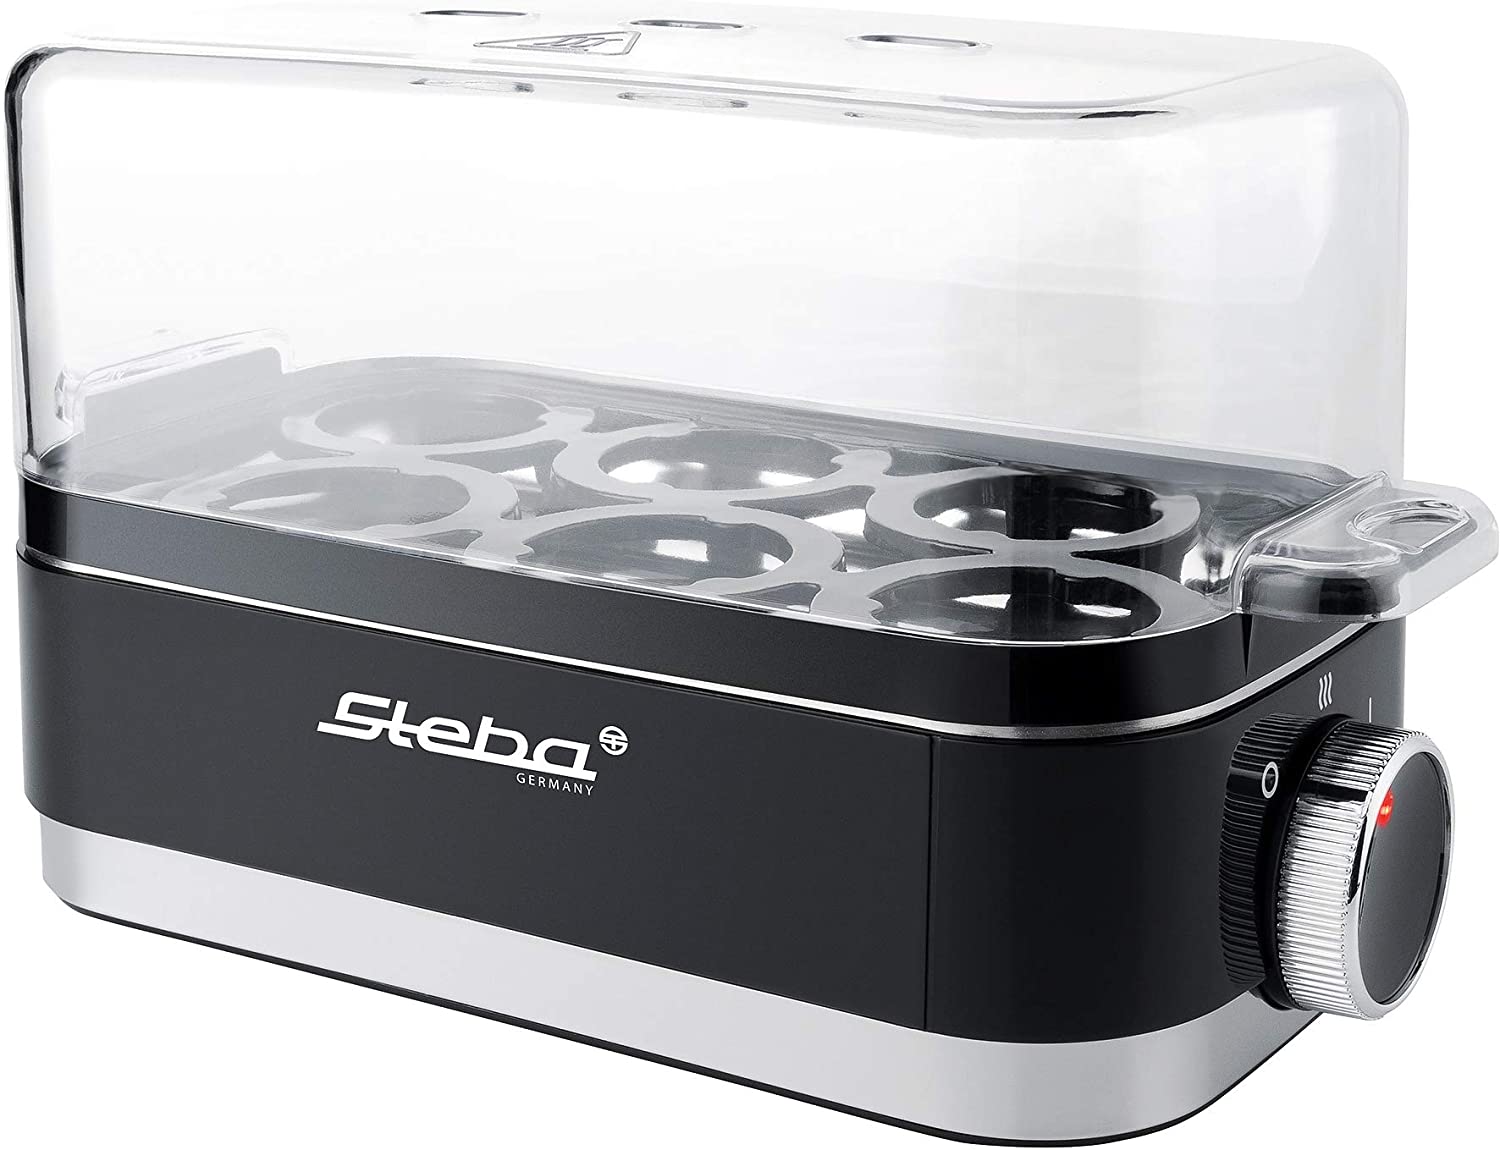 Steba Egg cooker EK 7, poaching insert, for max. 6 eggs, on/off switch, warming function, egg tray with carrying handles, operating control light, end signal, measuring cup for cooking level adjustment